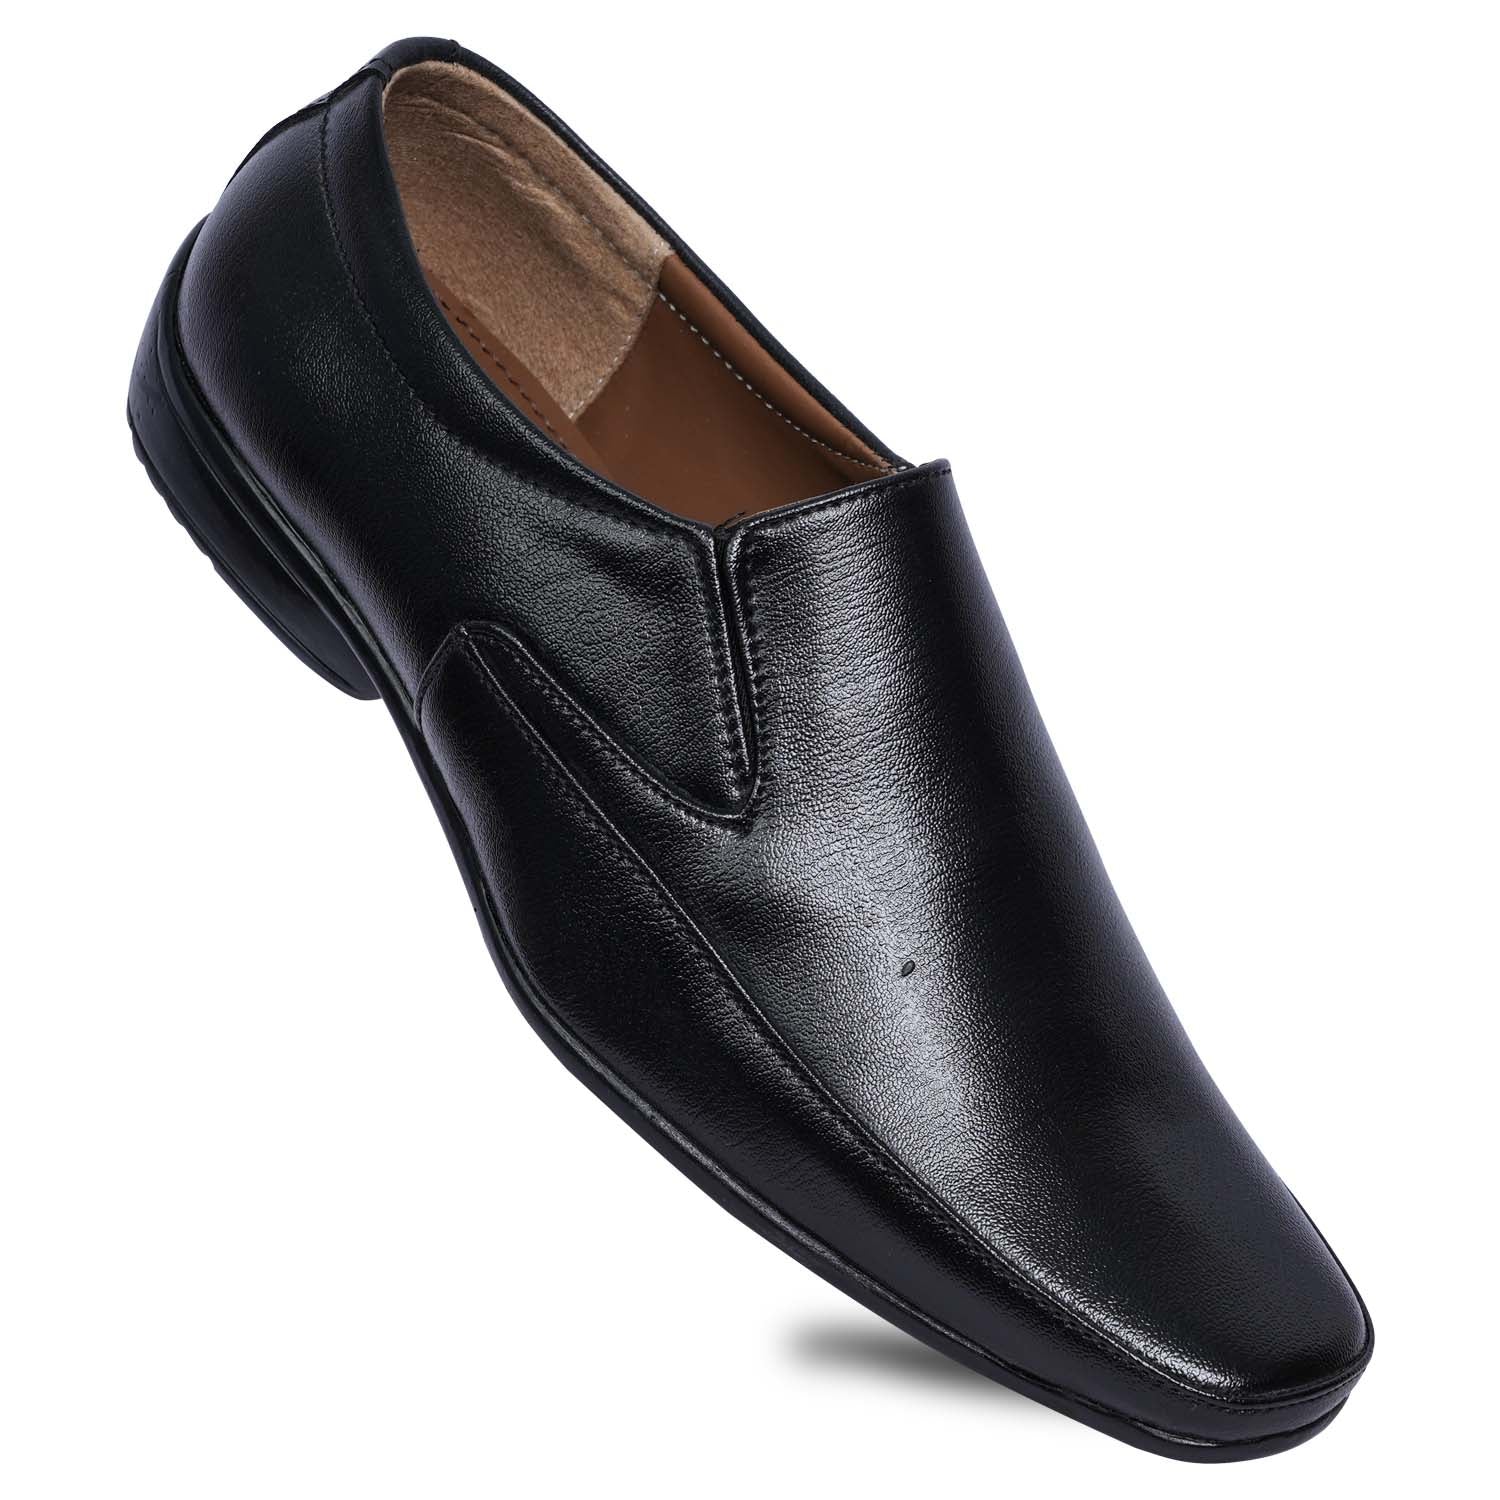 Paragon R2004G Men Formal Shoes | Corporate Office Shoes | Smart &amp; Sleek Design | Comfortable Sole with Cushioning | Daily &amp; Occasion Wear